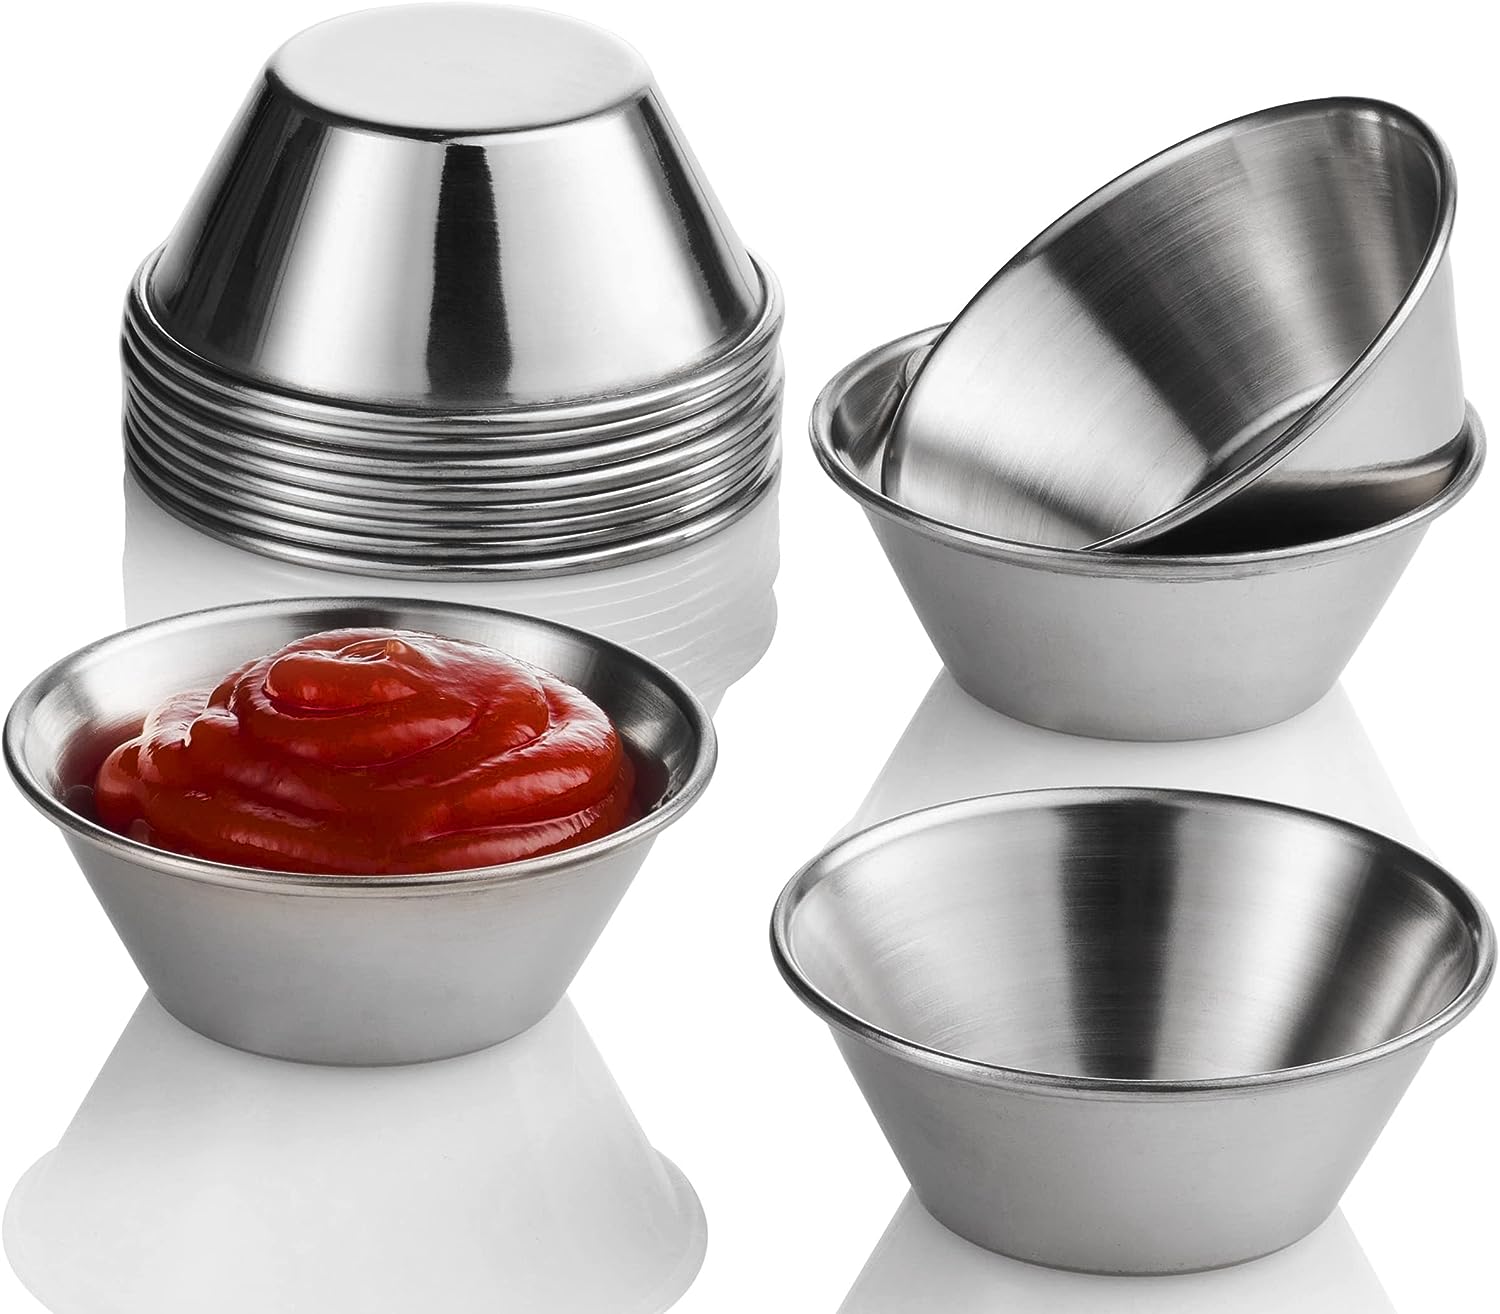 Pro-Grade Stainless Steel 1.5oz Sauce Cups 36 Pk. Reusable Stackable Metal  Portion Containers for Sampling, Salad Dressing Sides or Dipping Sauces.